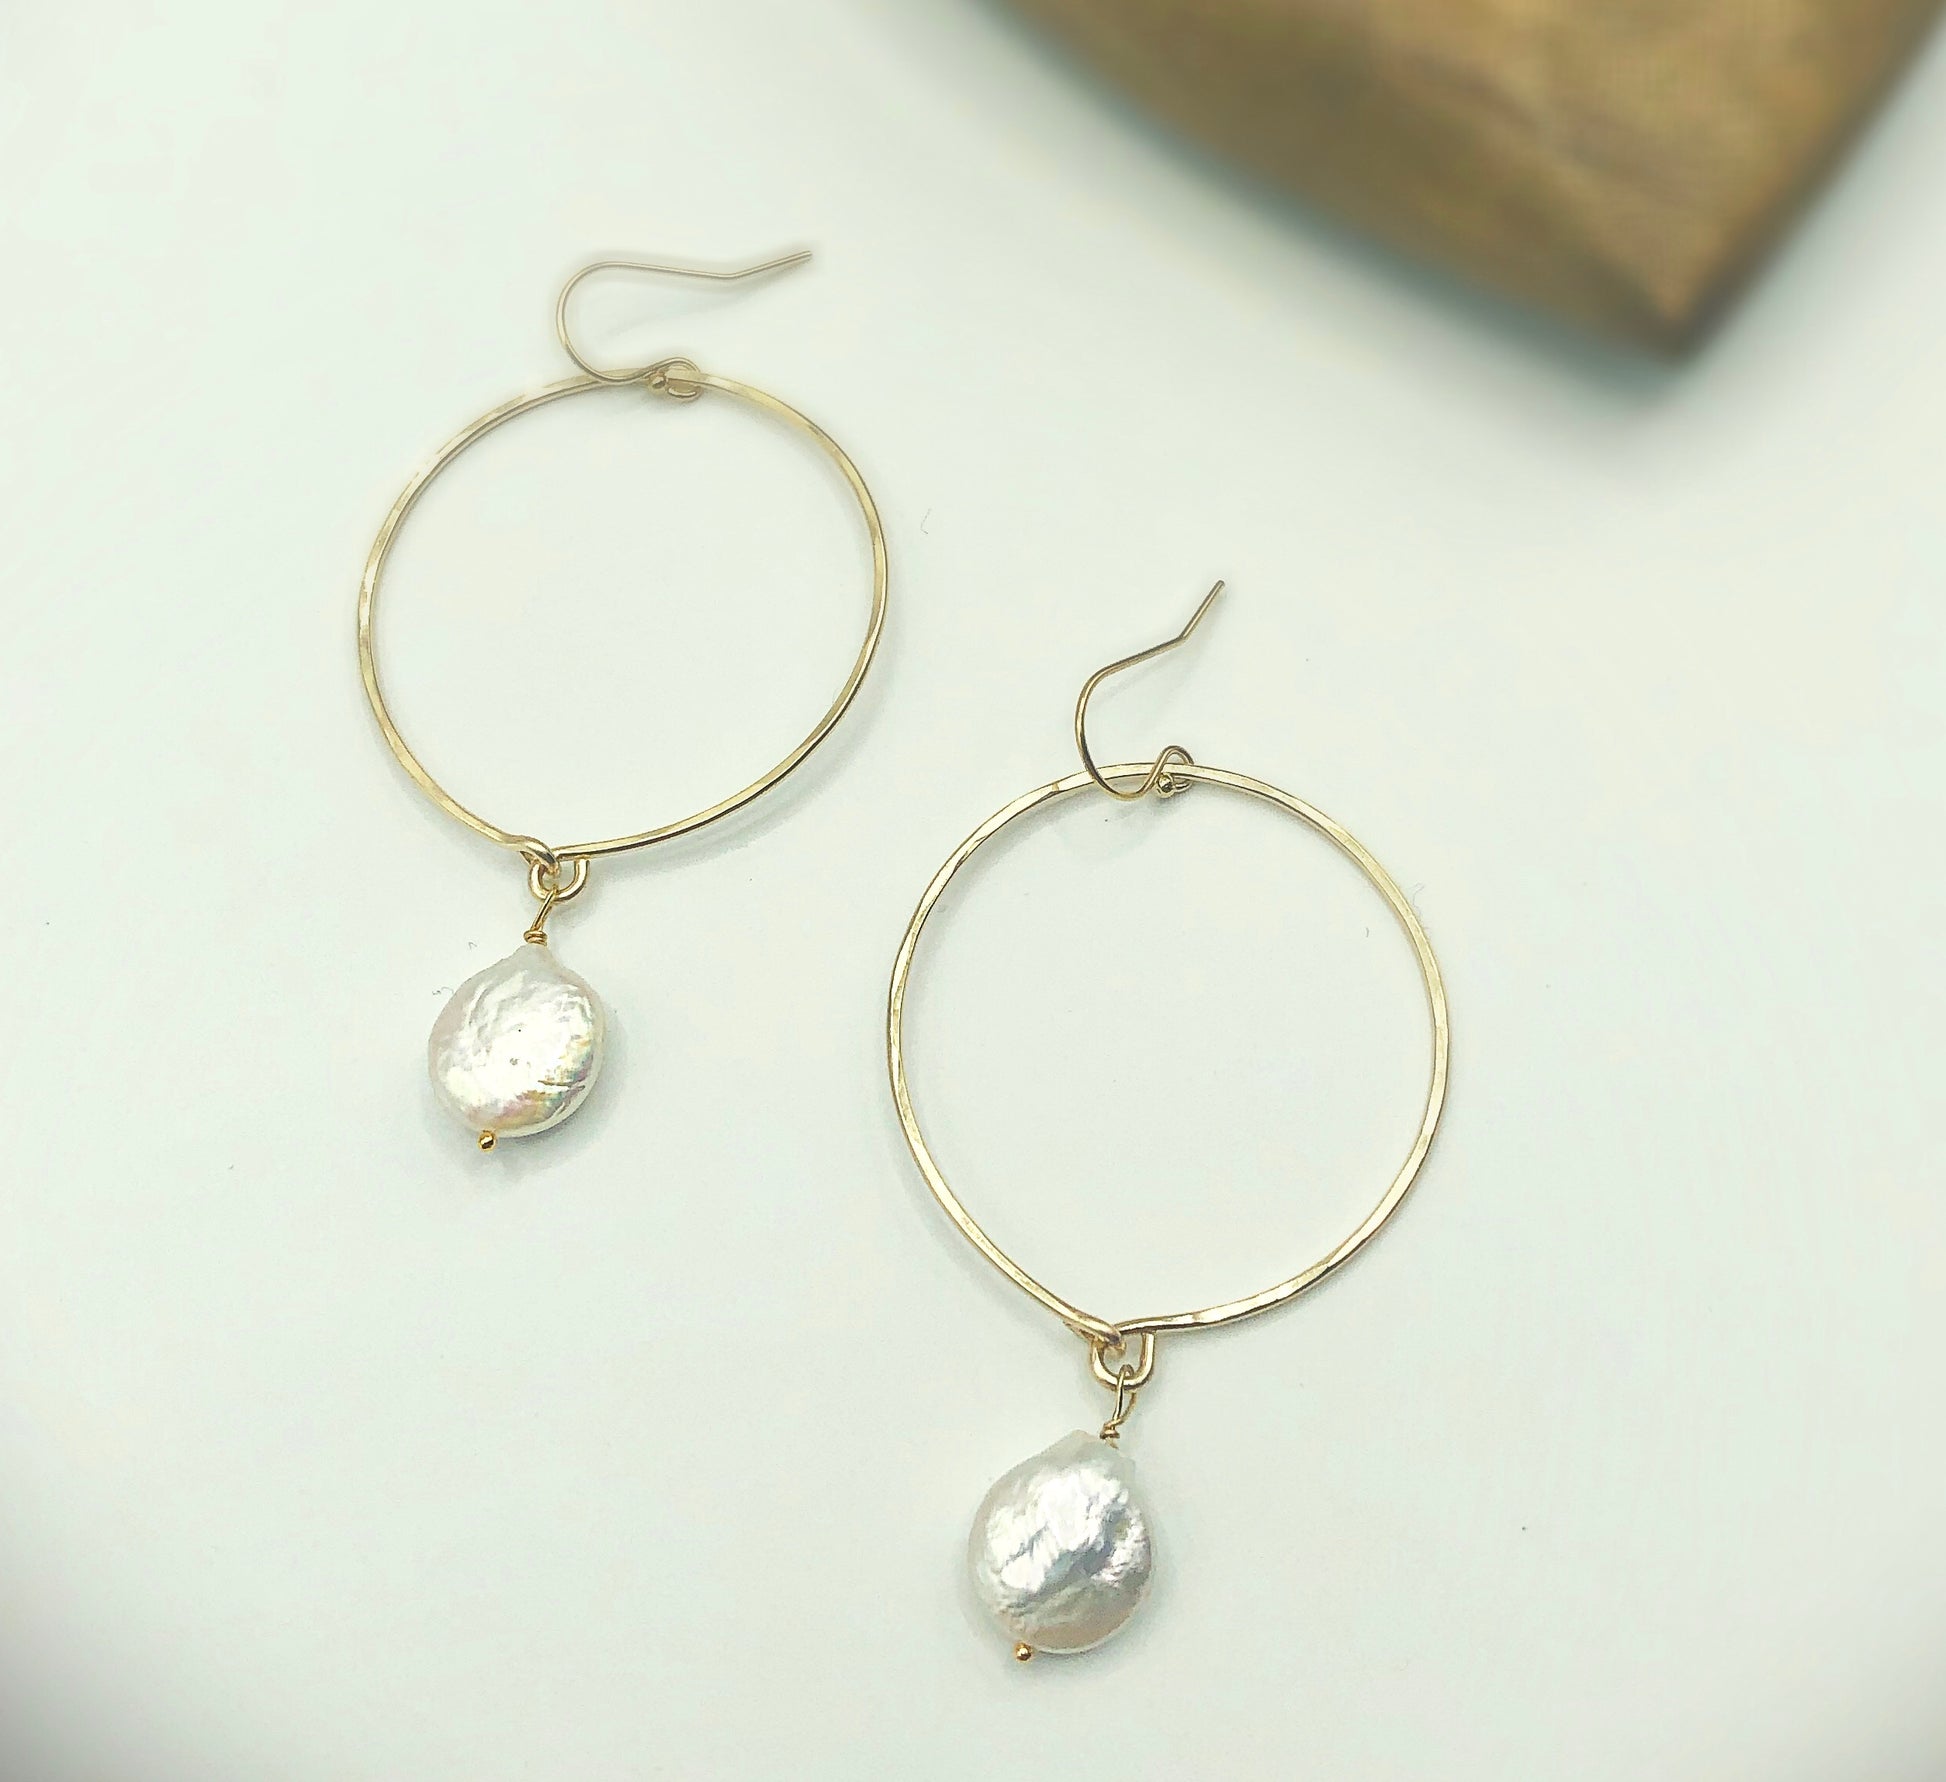 Capitola Pearl Hoops - Blue Sky Feathers